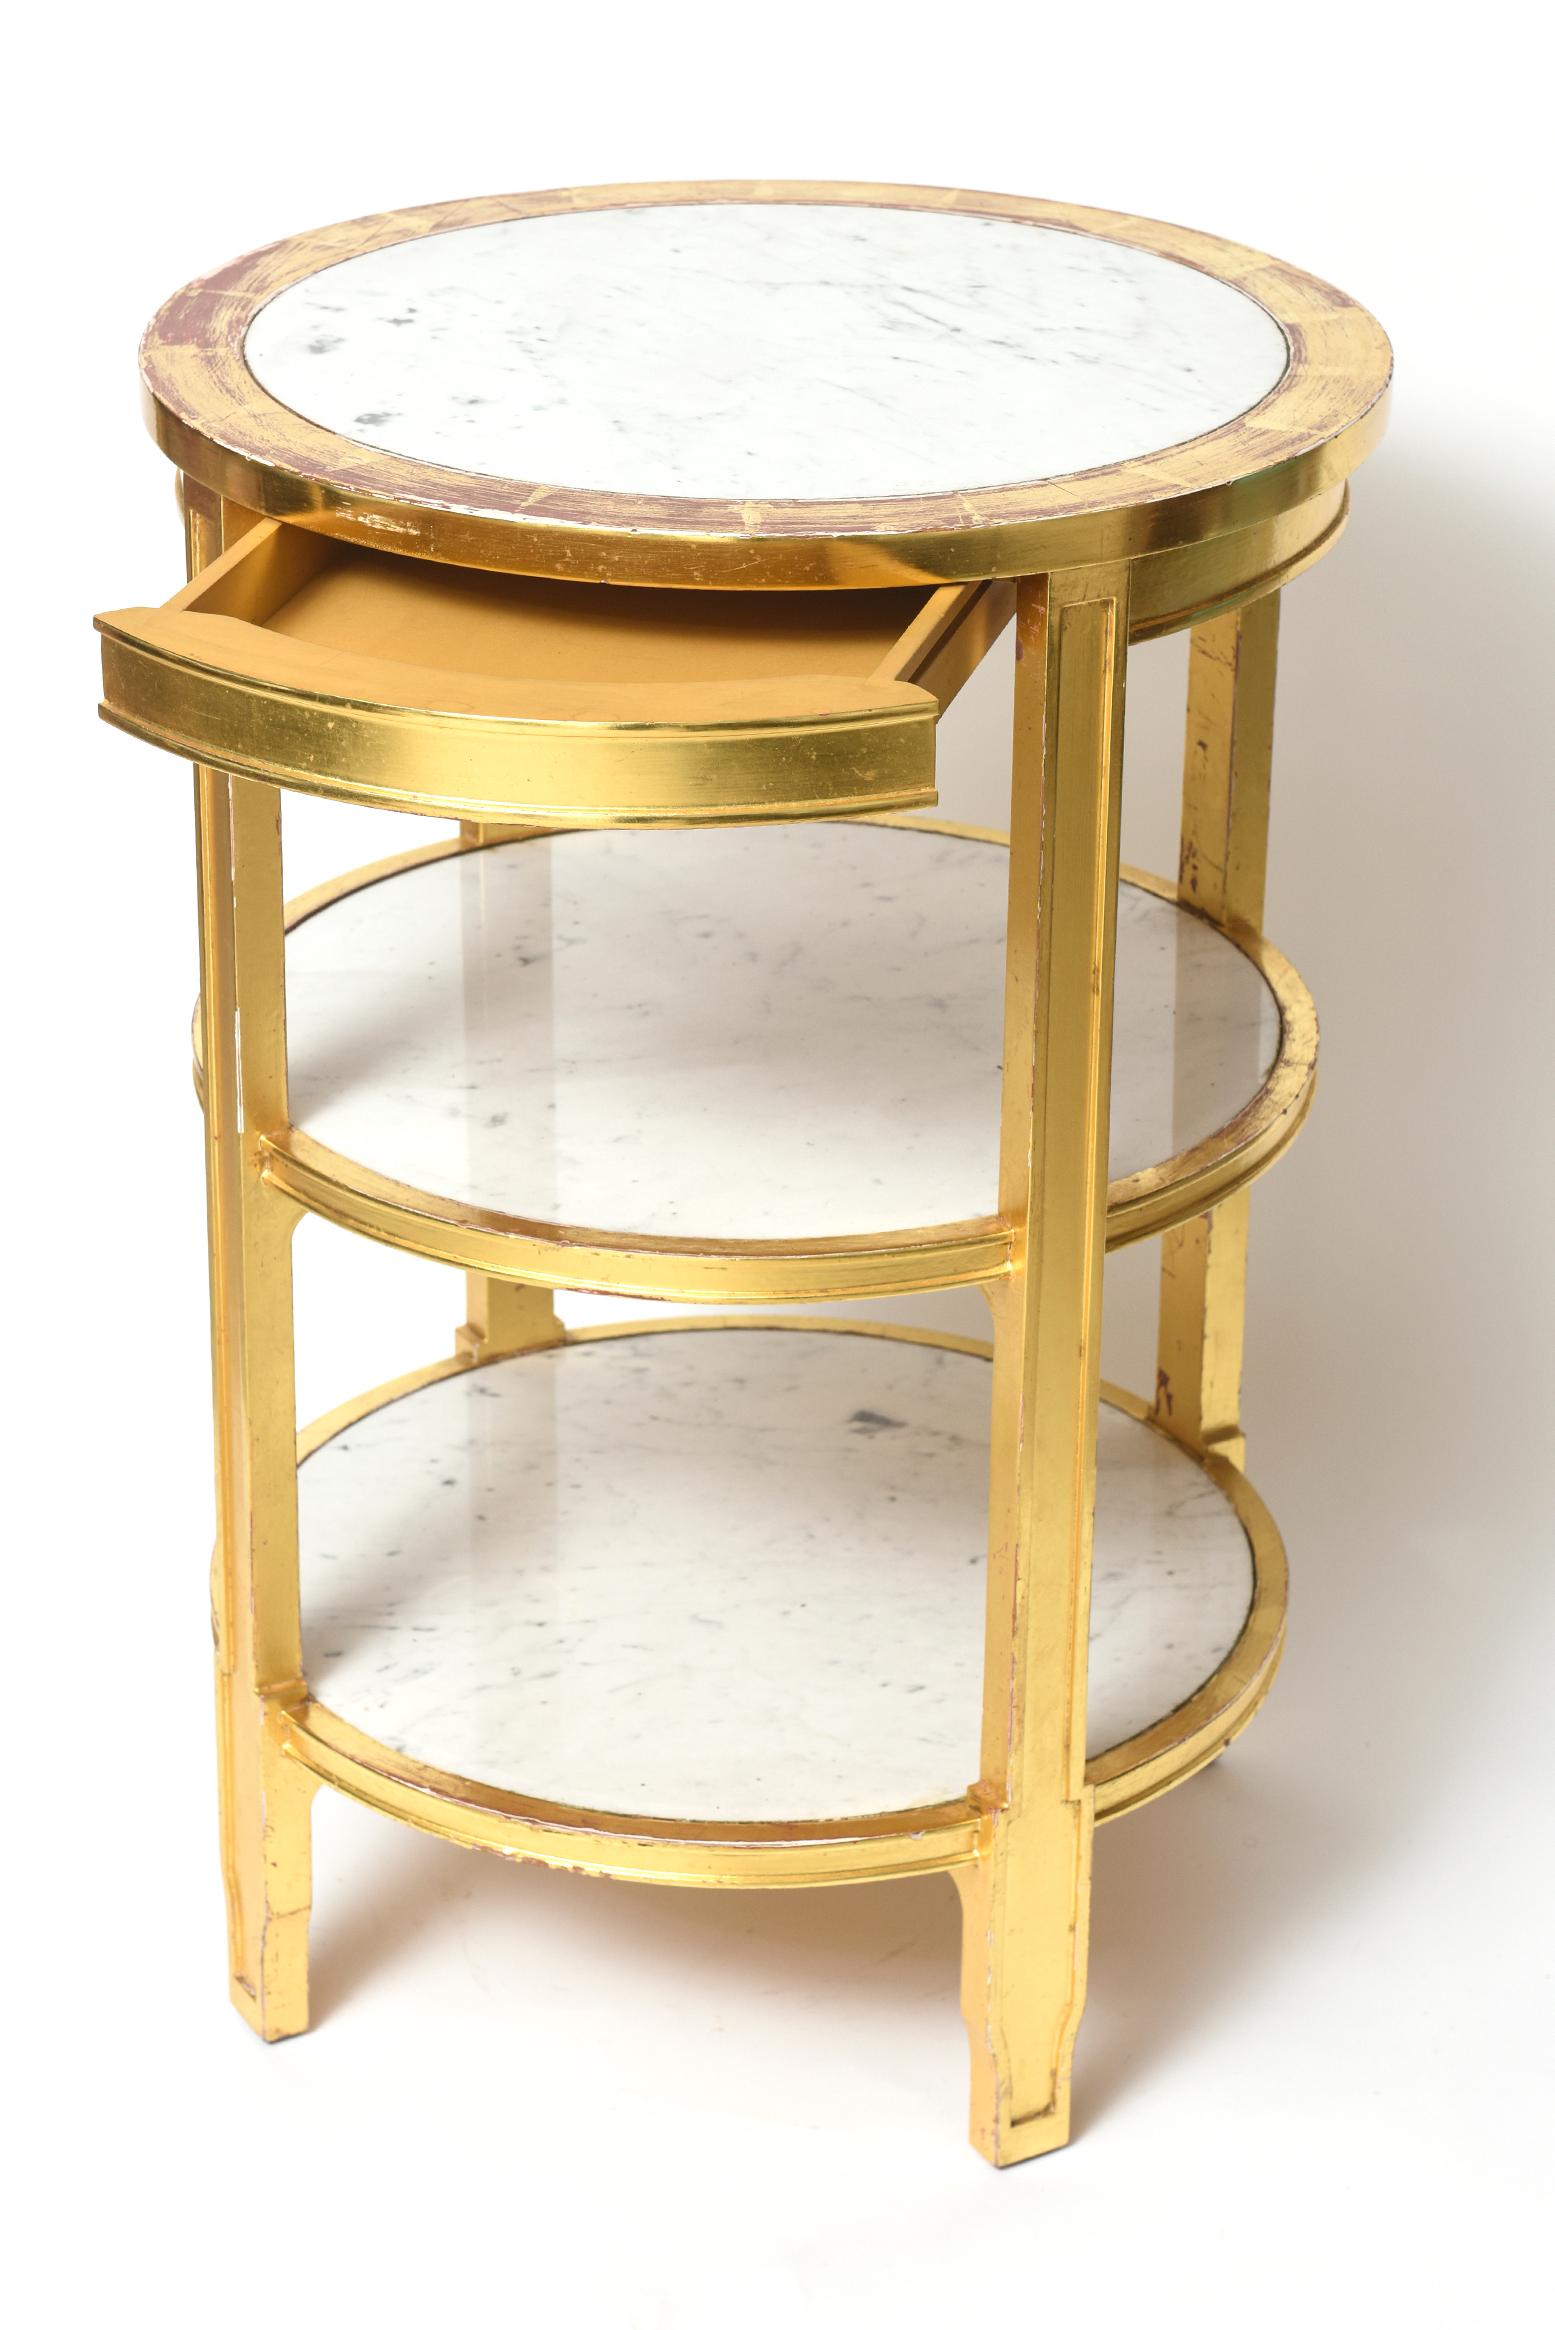 20th Century After Jean-Michel Frank Giltwood and White Marble Three Tiered Table